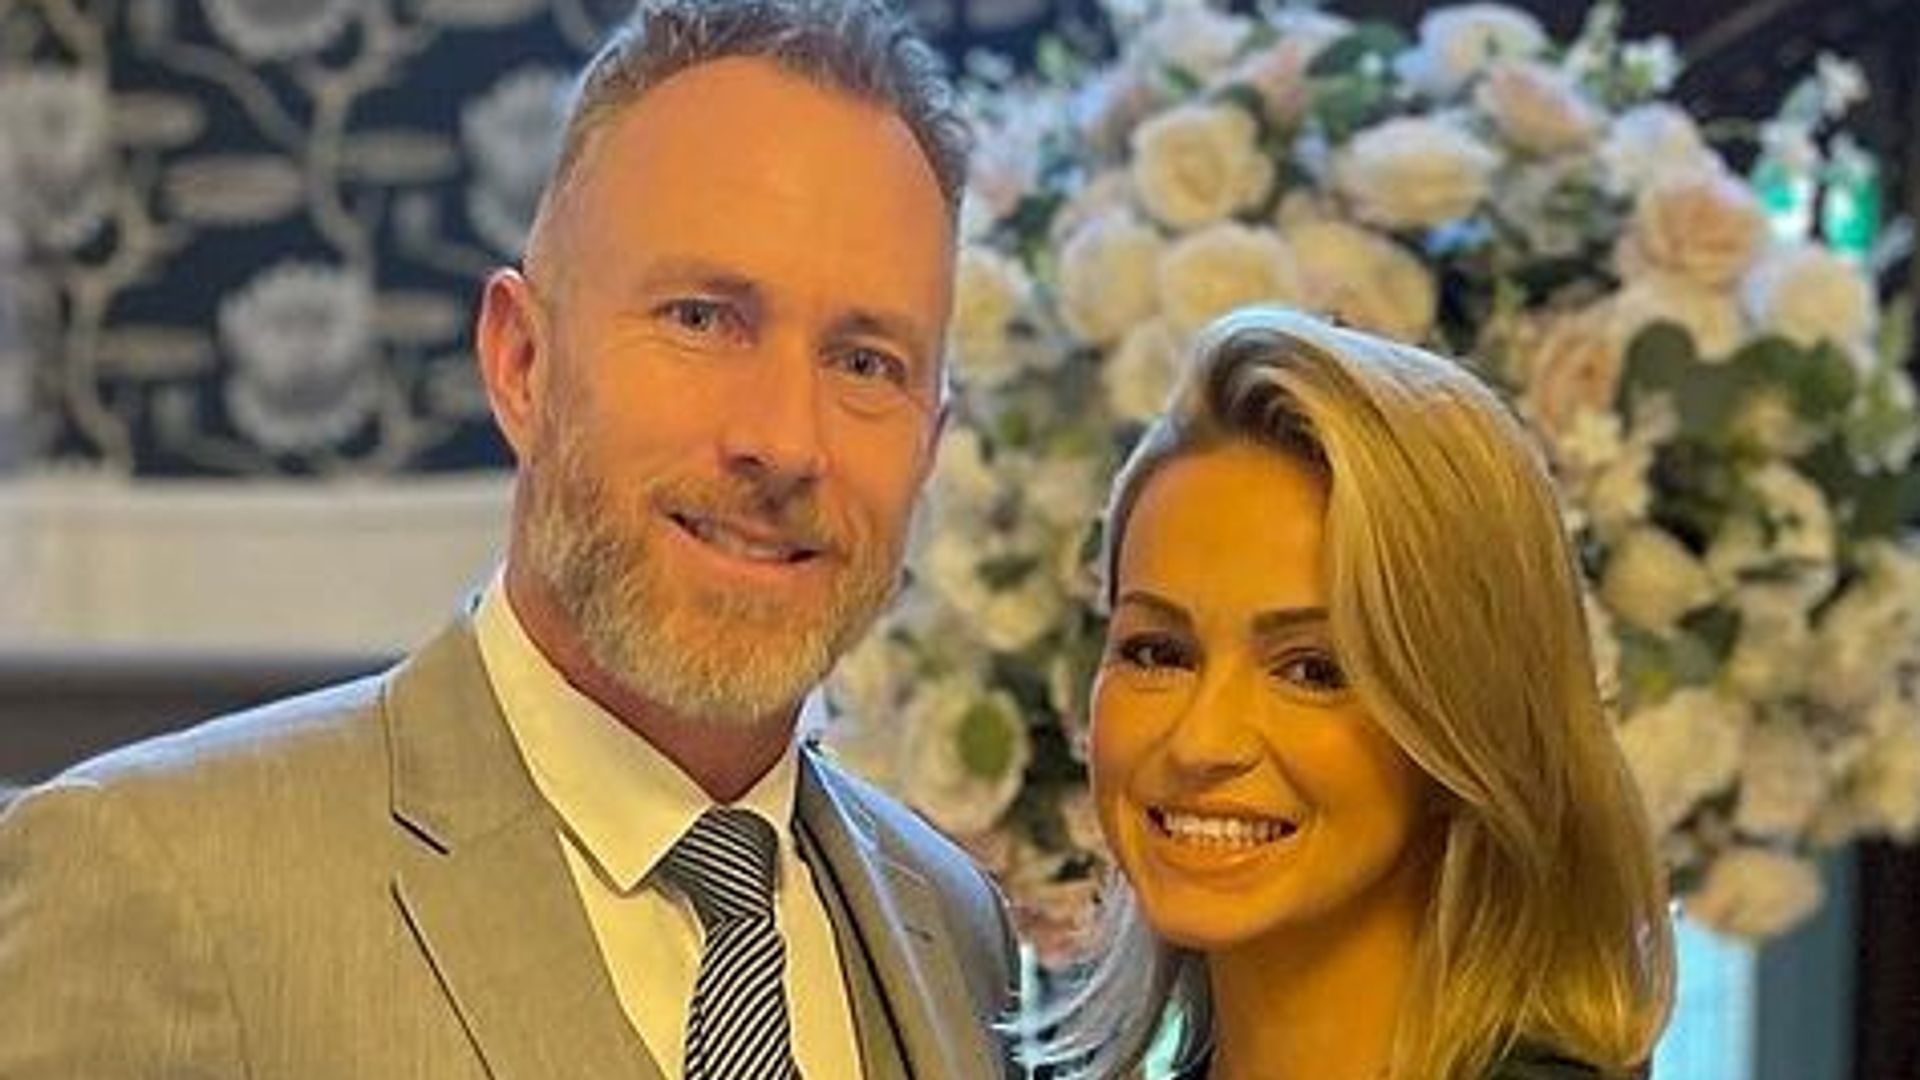 Ola Jordan in a mini dress with James Jordan in front of a staircase